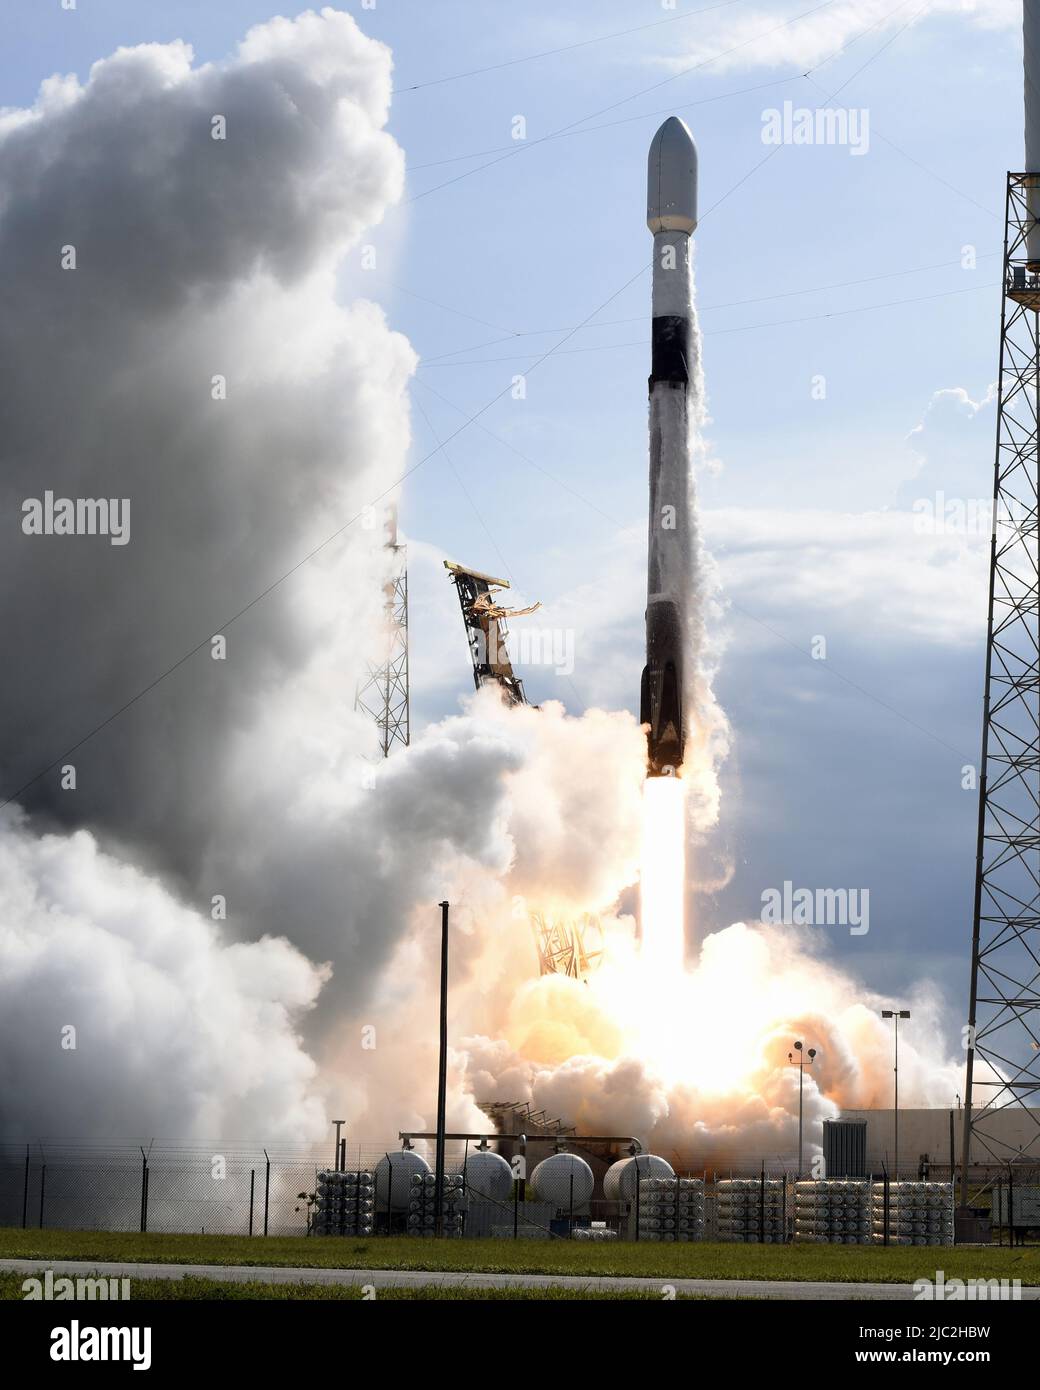 A SpaceX Falcon 9 rocket boosts Nilesat 301 from Complex 40 at 5:04 PM from the Cape Canaveral Space Force Station, Florida, on Wednesday, June 8, 2022. Nilesat will provide communications services for Egypt and the Mid East region. Photo by Joe Marino/UPI Credit: UPI/Alamy Live News Stock Photo